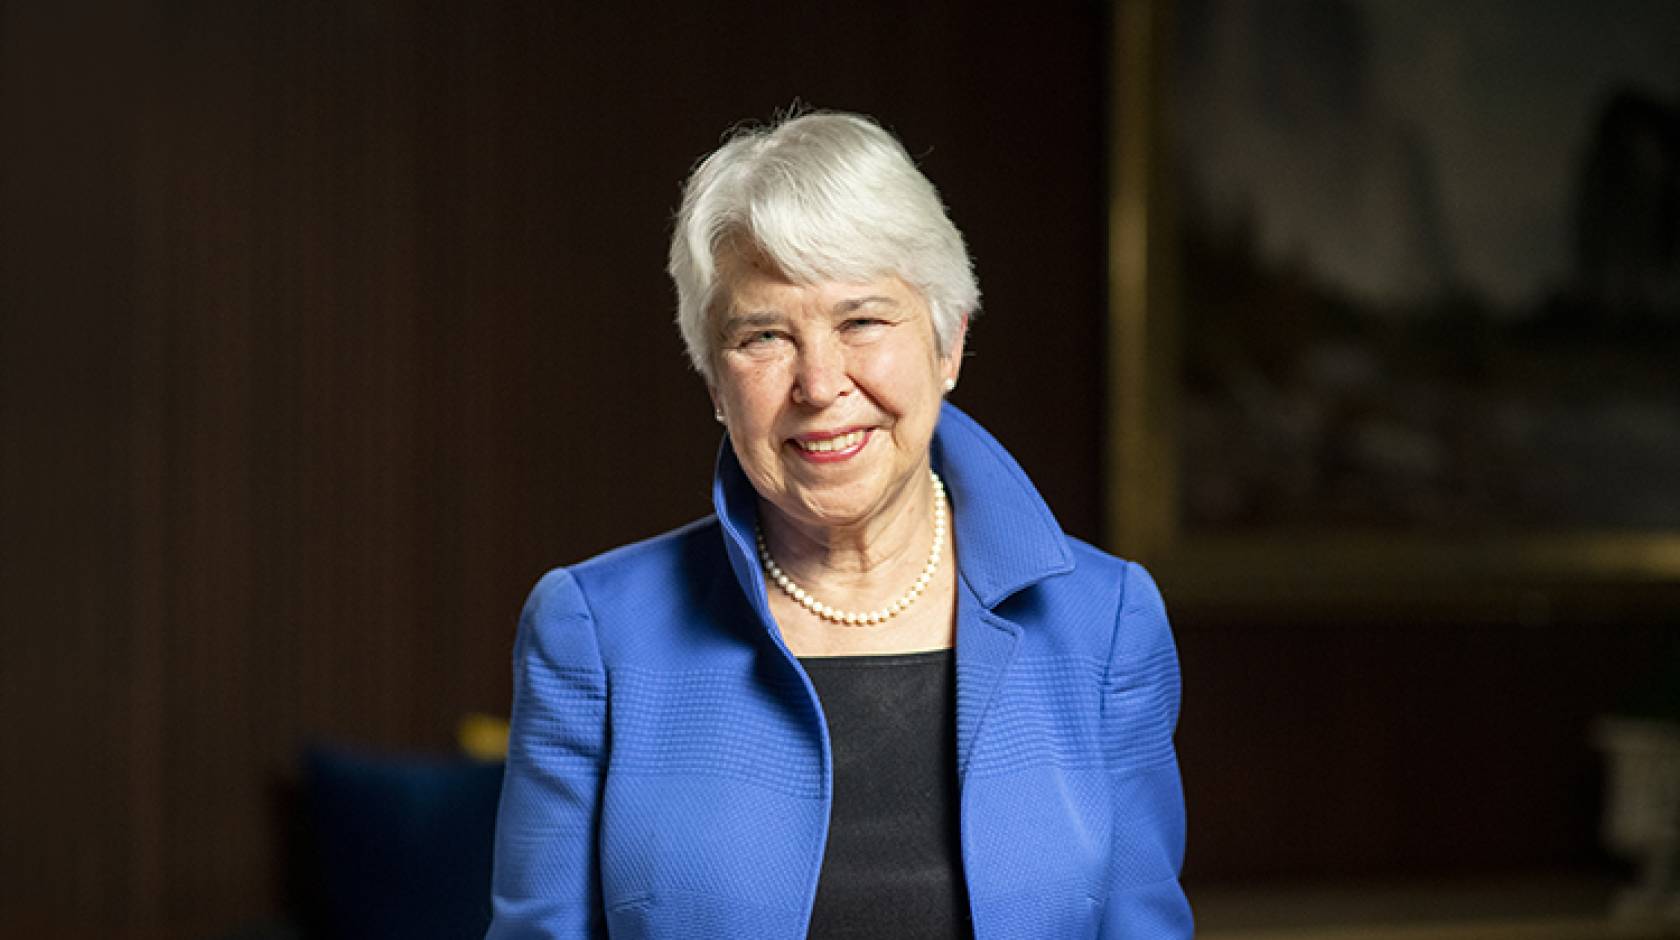 UC Berkeley Chancellor Carol Christ, smiling woman with short white hair, in blue jacket